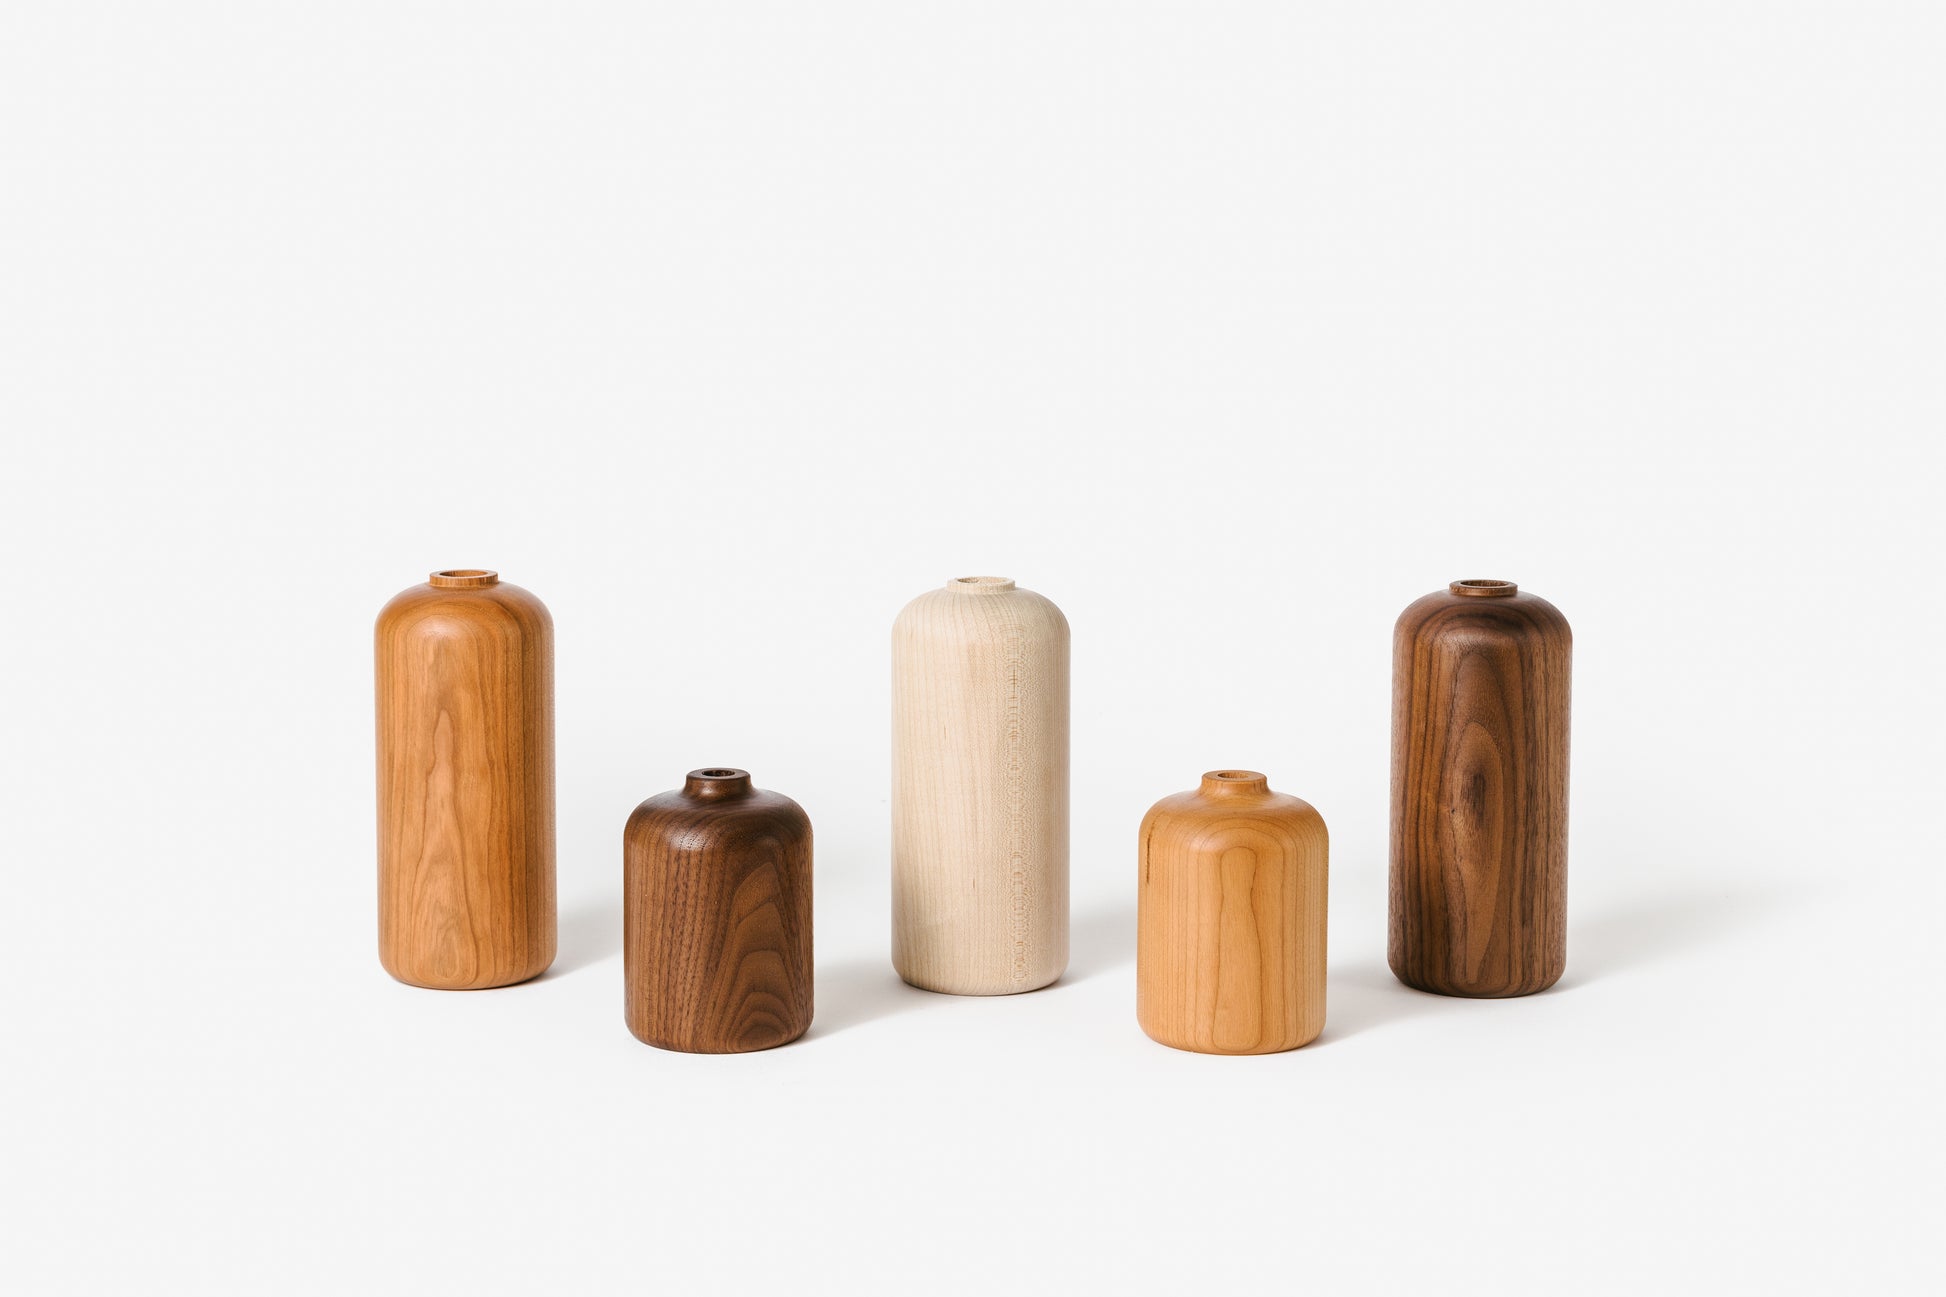 Straight bud vases with tall bud vases in cherry, walnut, and maple.